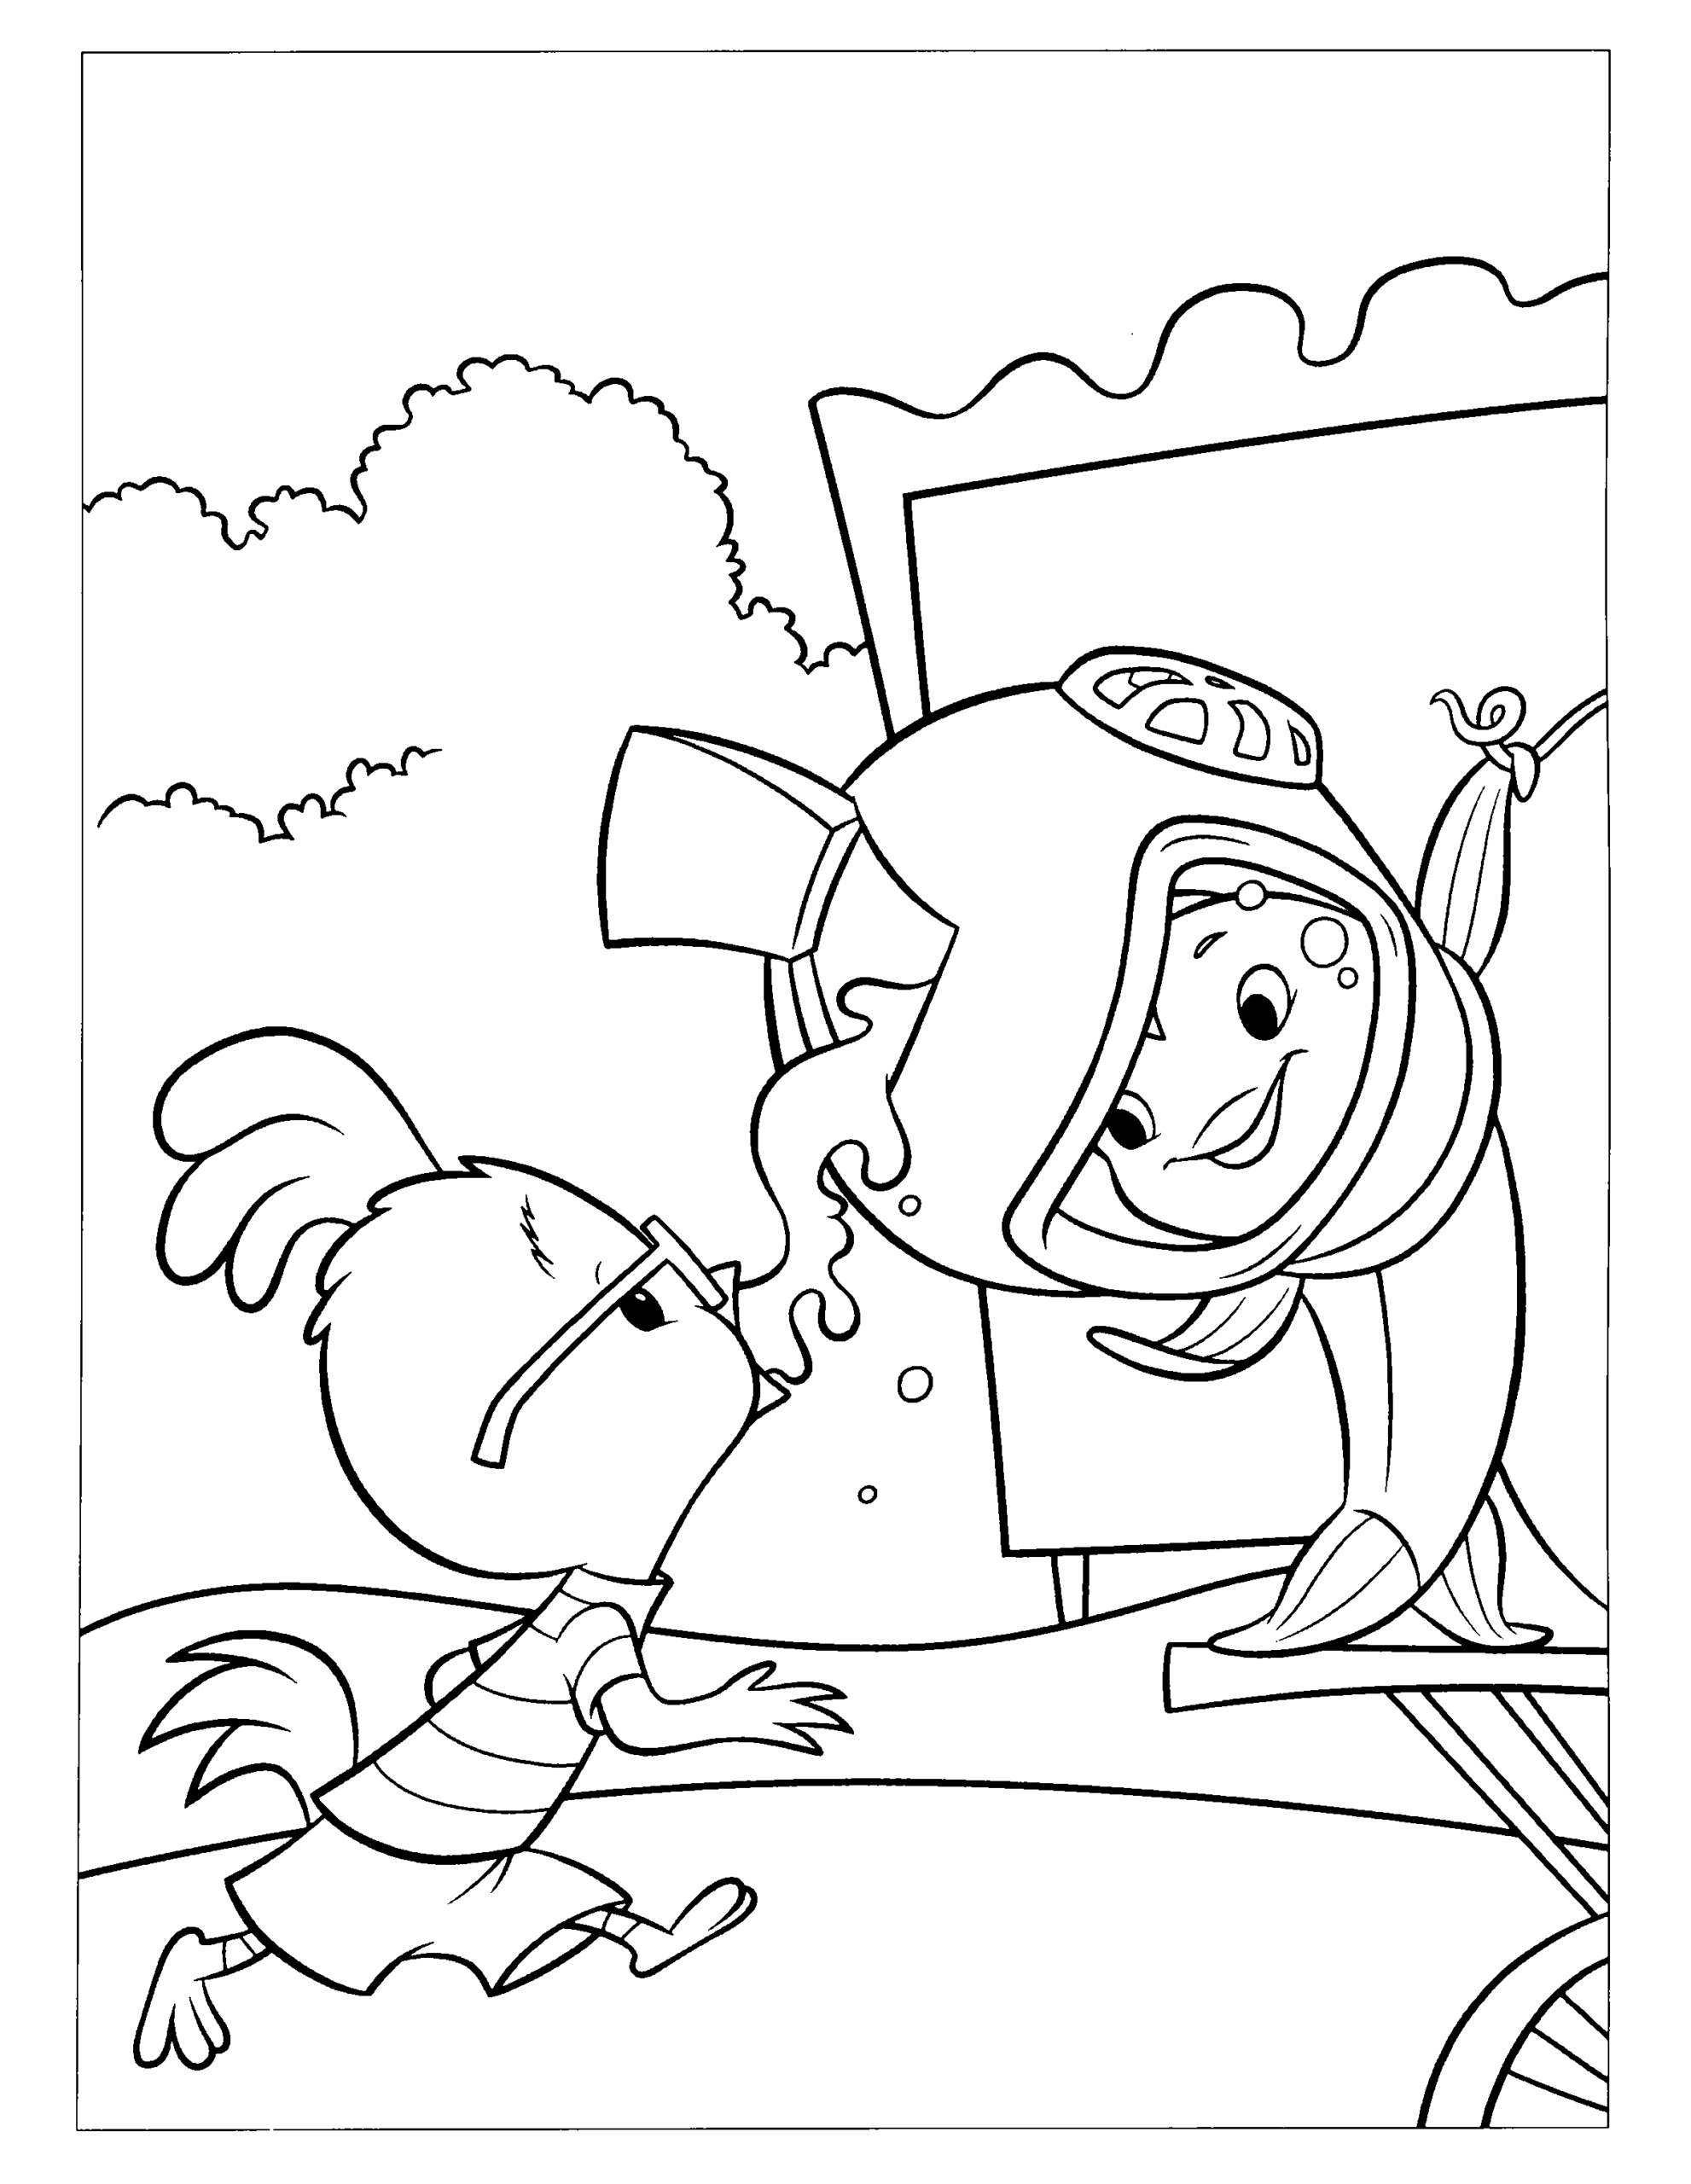 Chicken Little Coloring Pages TV Film chicken little 9 Printable 2020 02097 Coloring4free